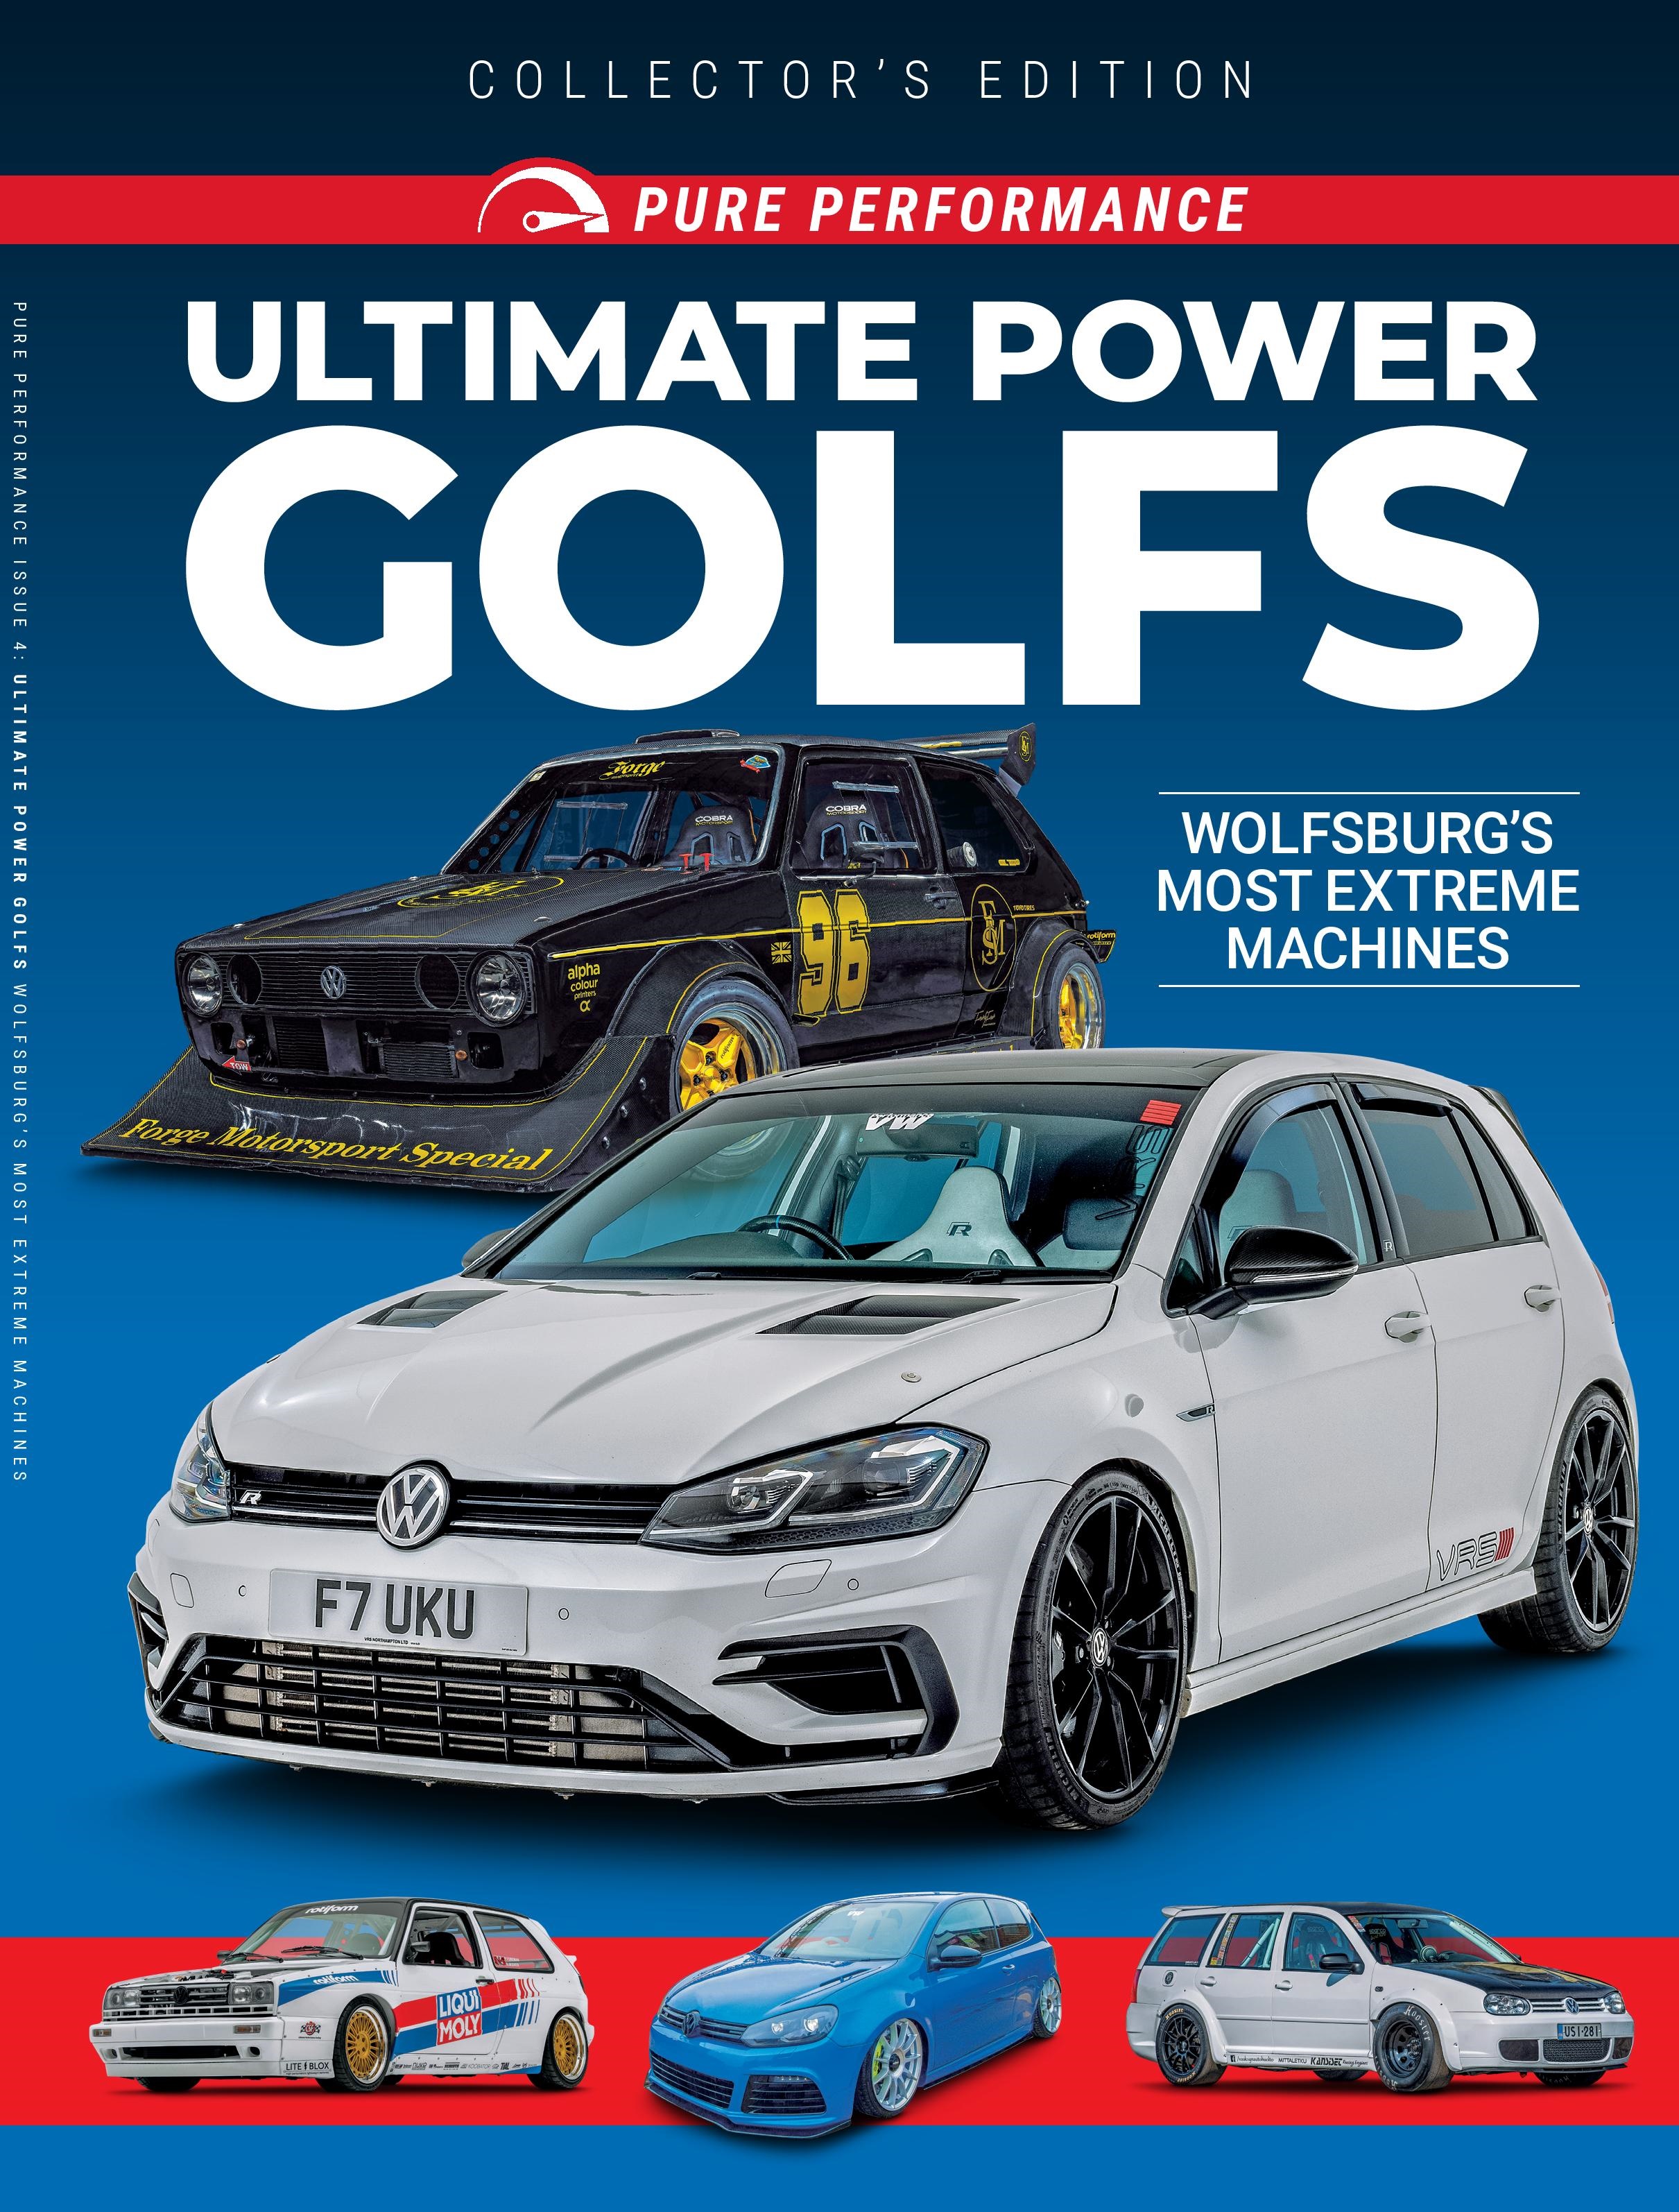 Pure Performance Issue 4 - Ultimate Power Golfs